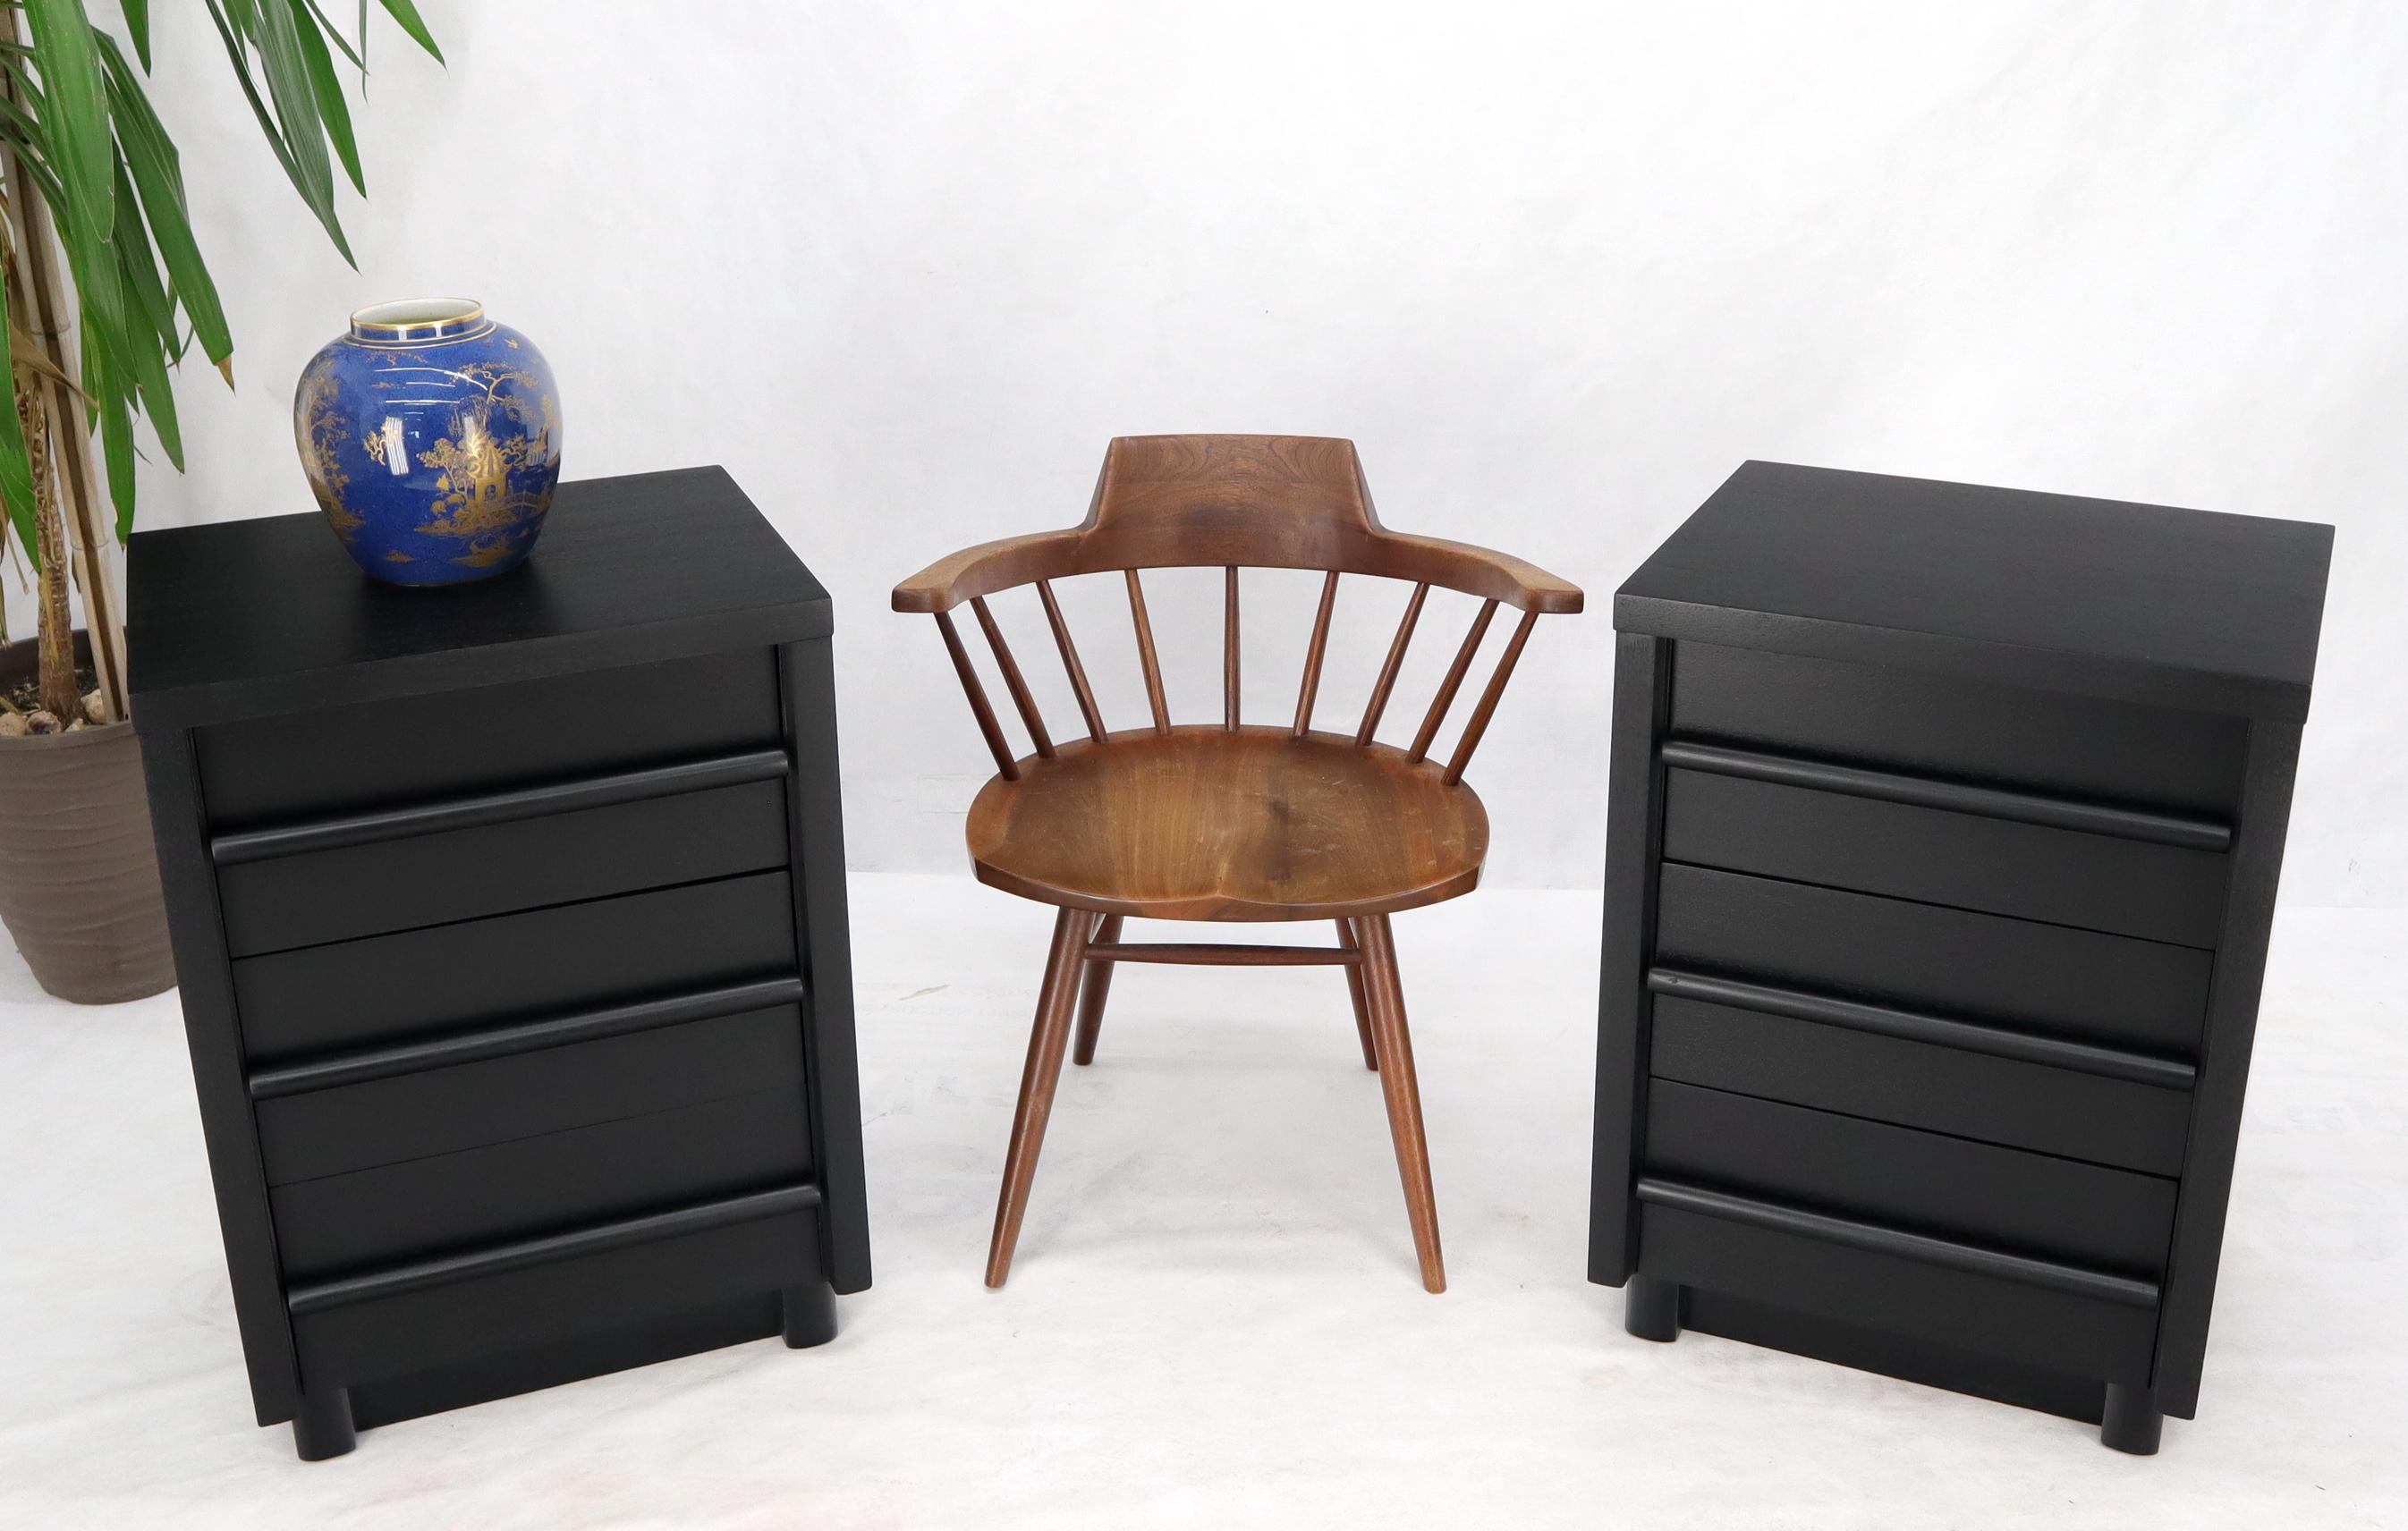 Pair of black lacquered three drawers night stands by American of Martinsville.